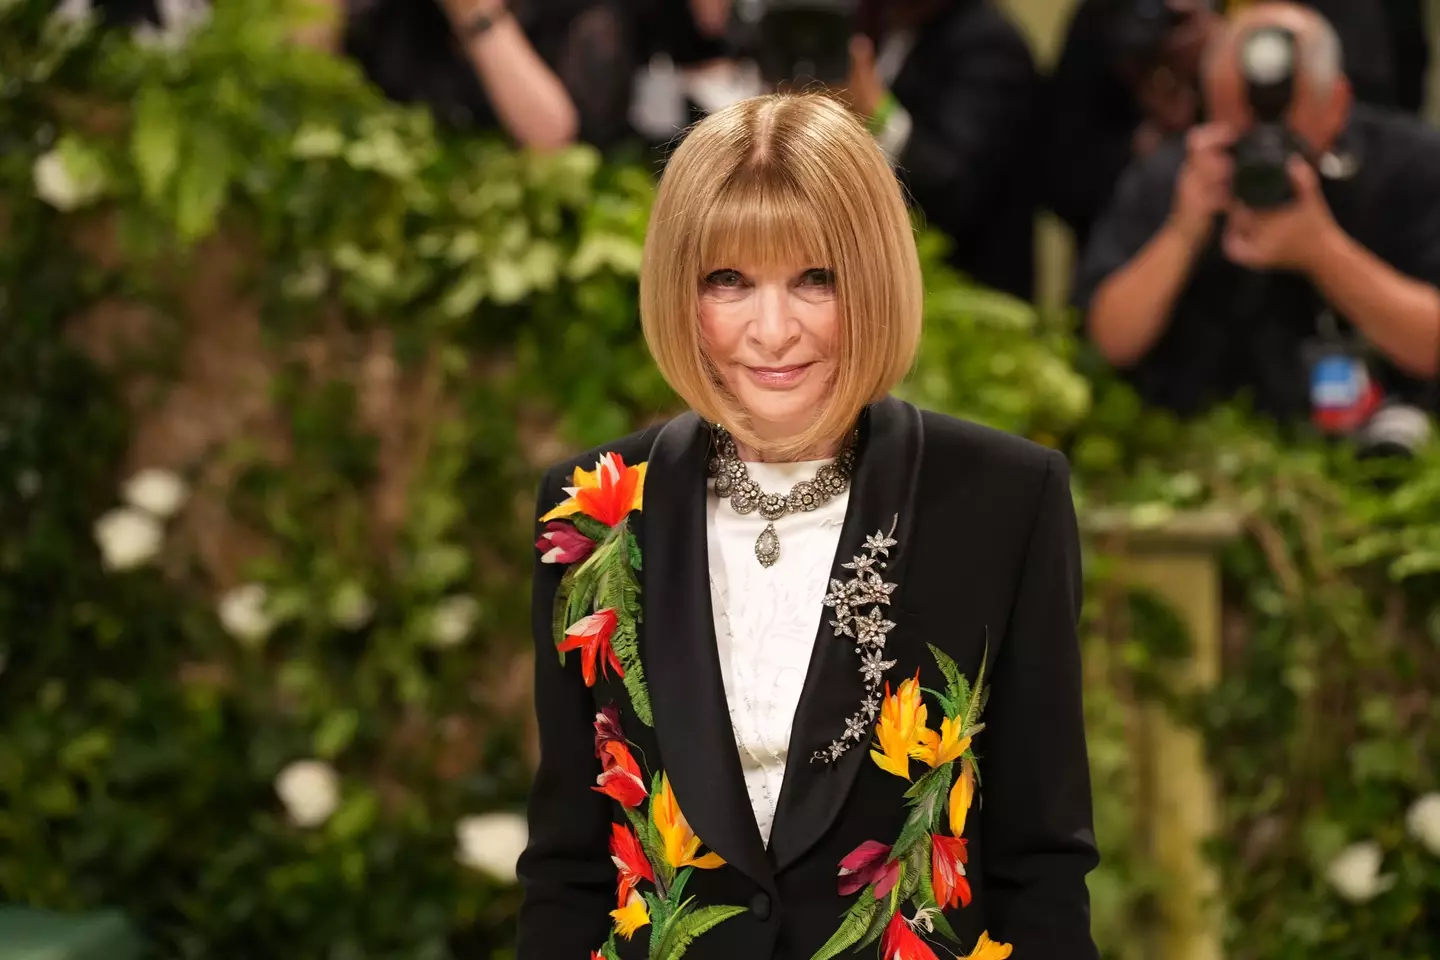 Anna Wintour explained some of the food rules. (Sean Zanni/Patrick McMullan via Getty Images))